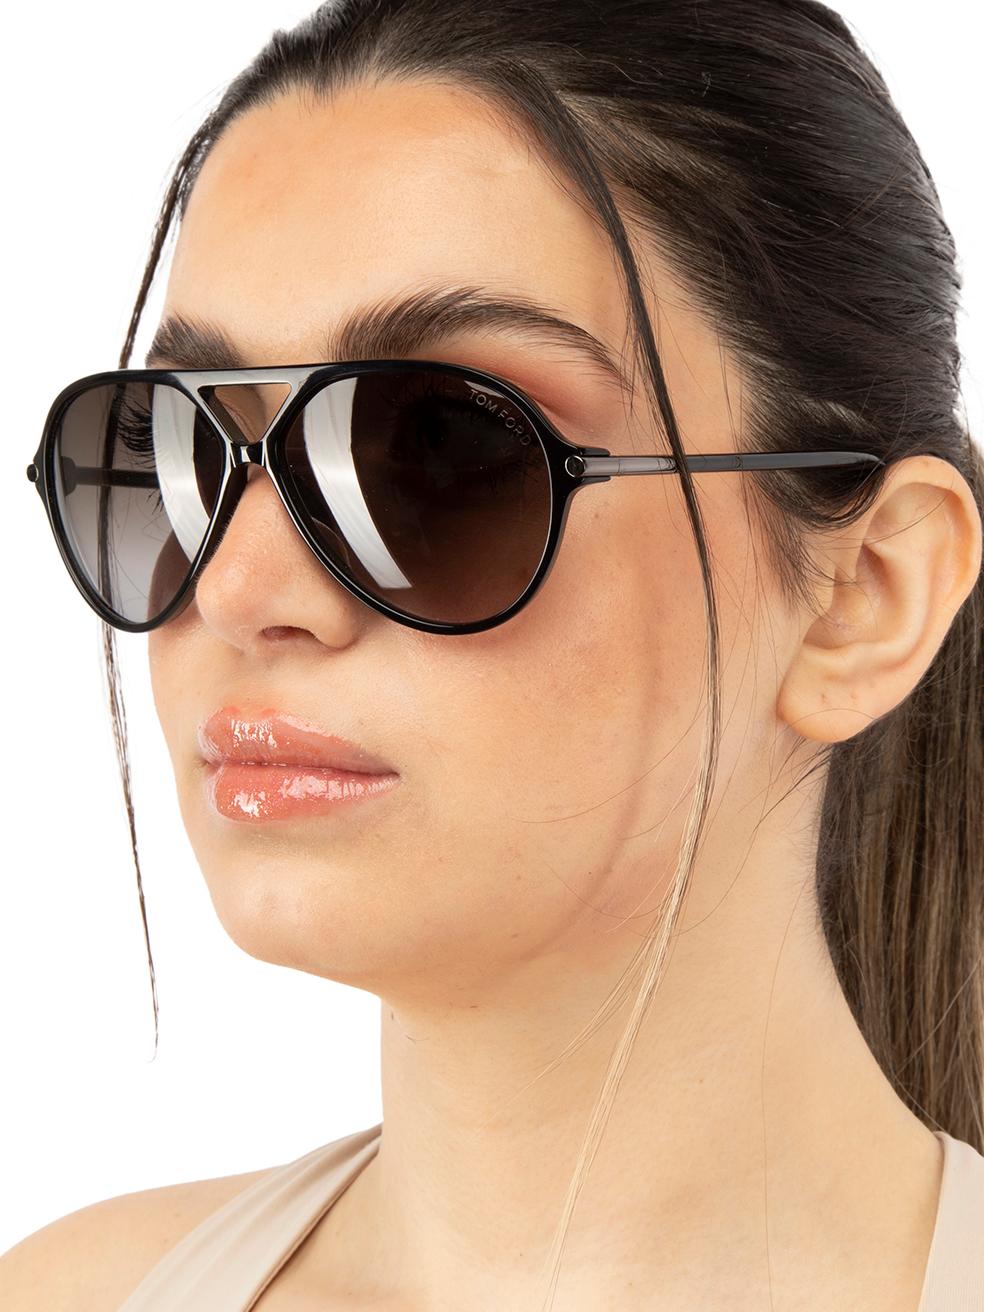 CONDITION is New with tags on this brand new Tom Ford designer item. This item comes with original packaging.
 
 
 
 Details
 
 
 Model: FT0197
 
 Shiny Black
 
 Acetate
 
 Aviator Sunglasses
 
 Black Gradient Lens
 
 Full-Rim
 
 
 
 
 
 Made in